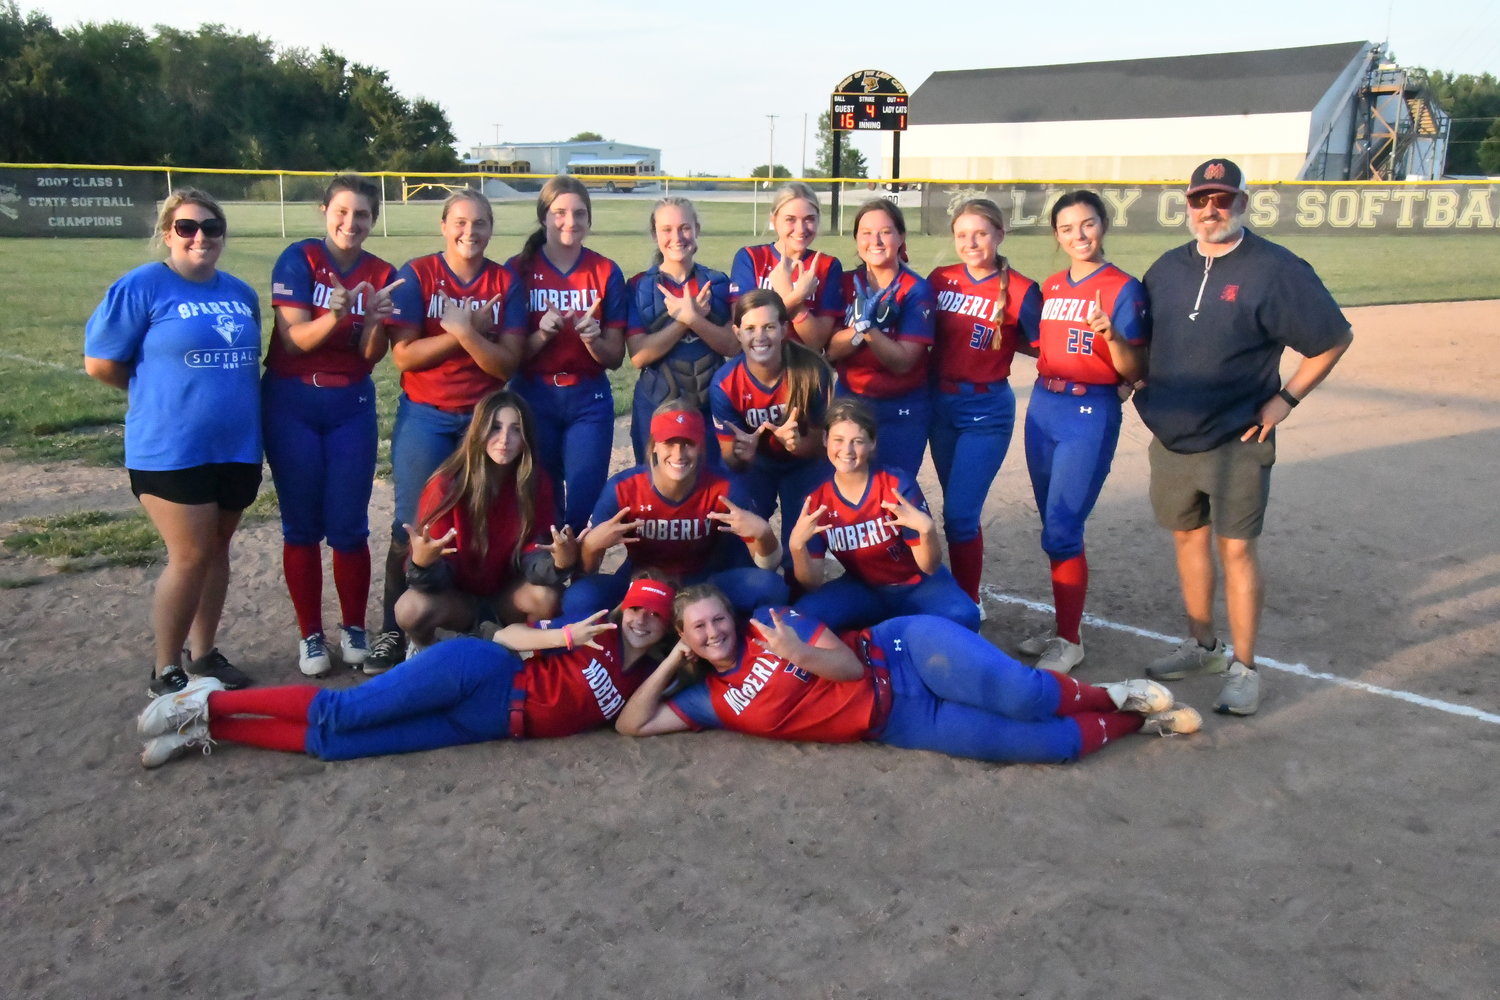 The Moberly High School softball team gathered for a group photo after Saturday's championship victory over Cairo.